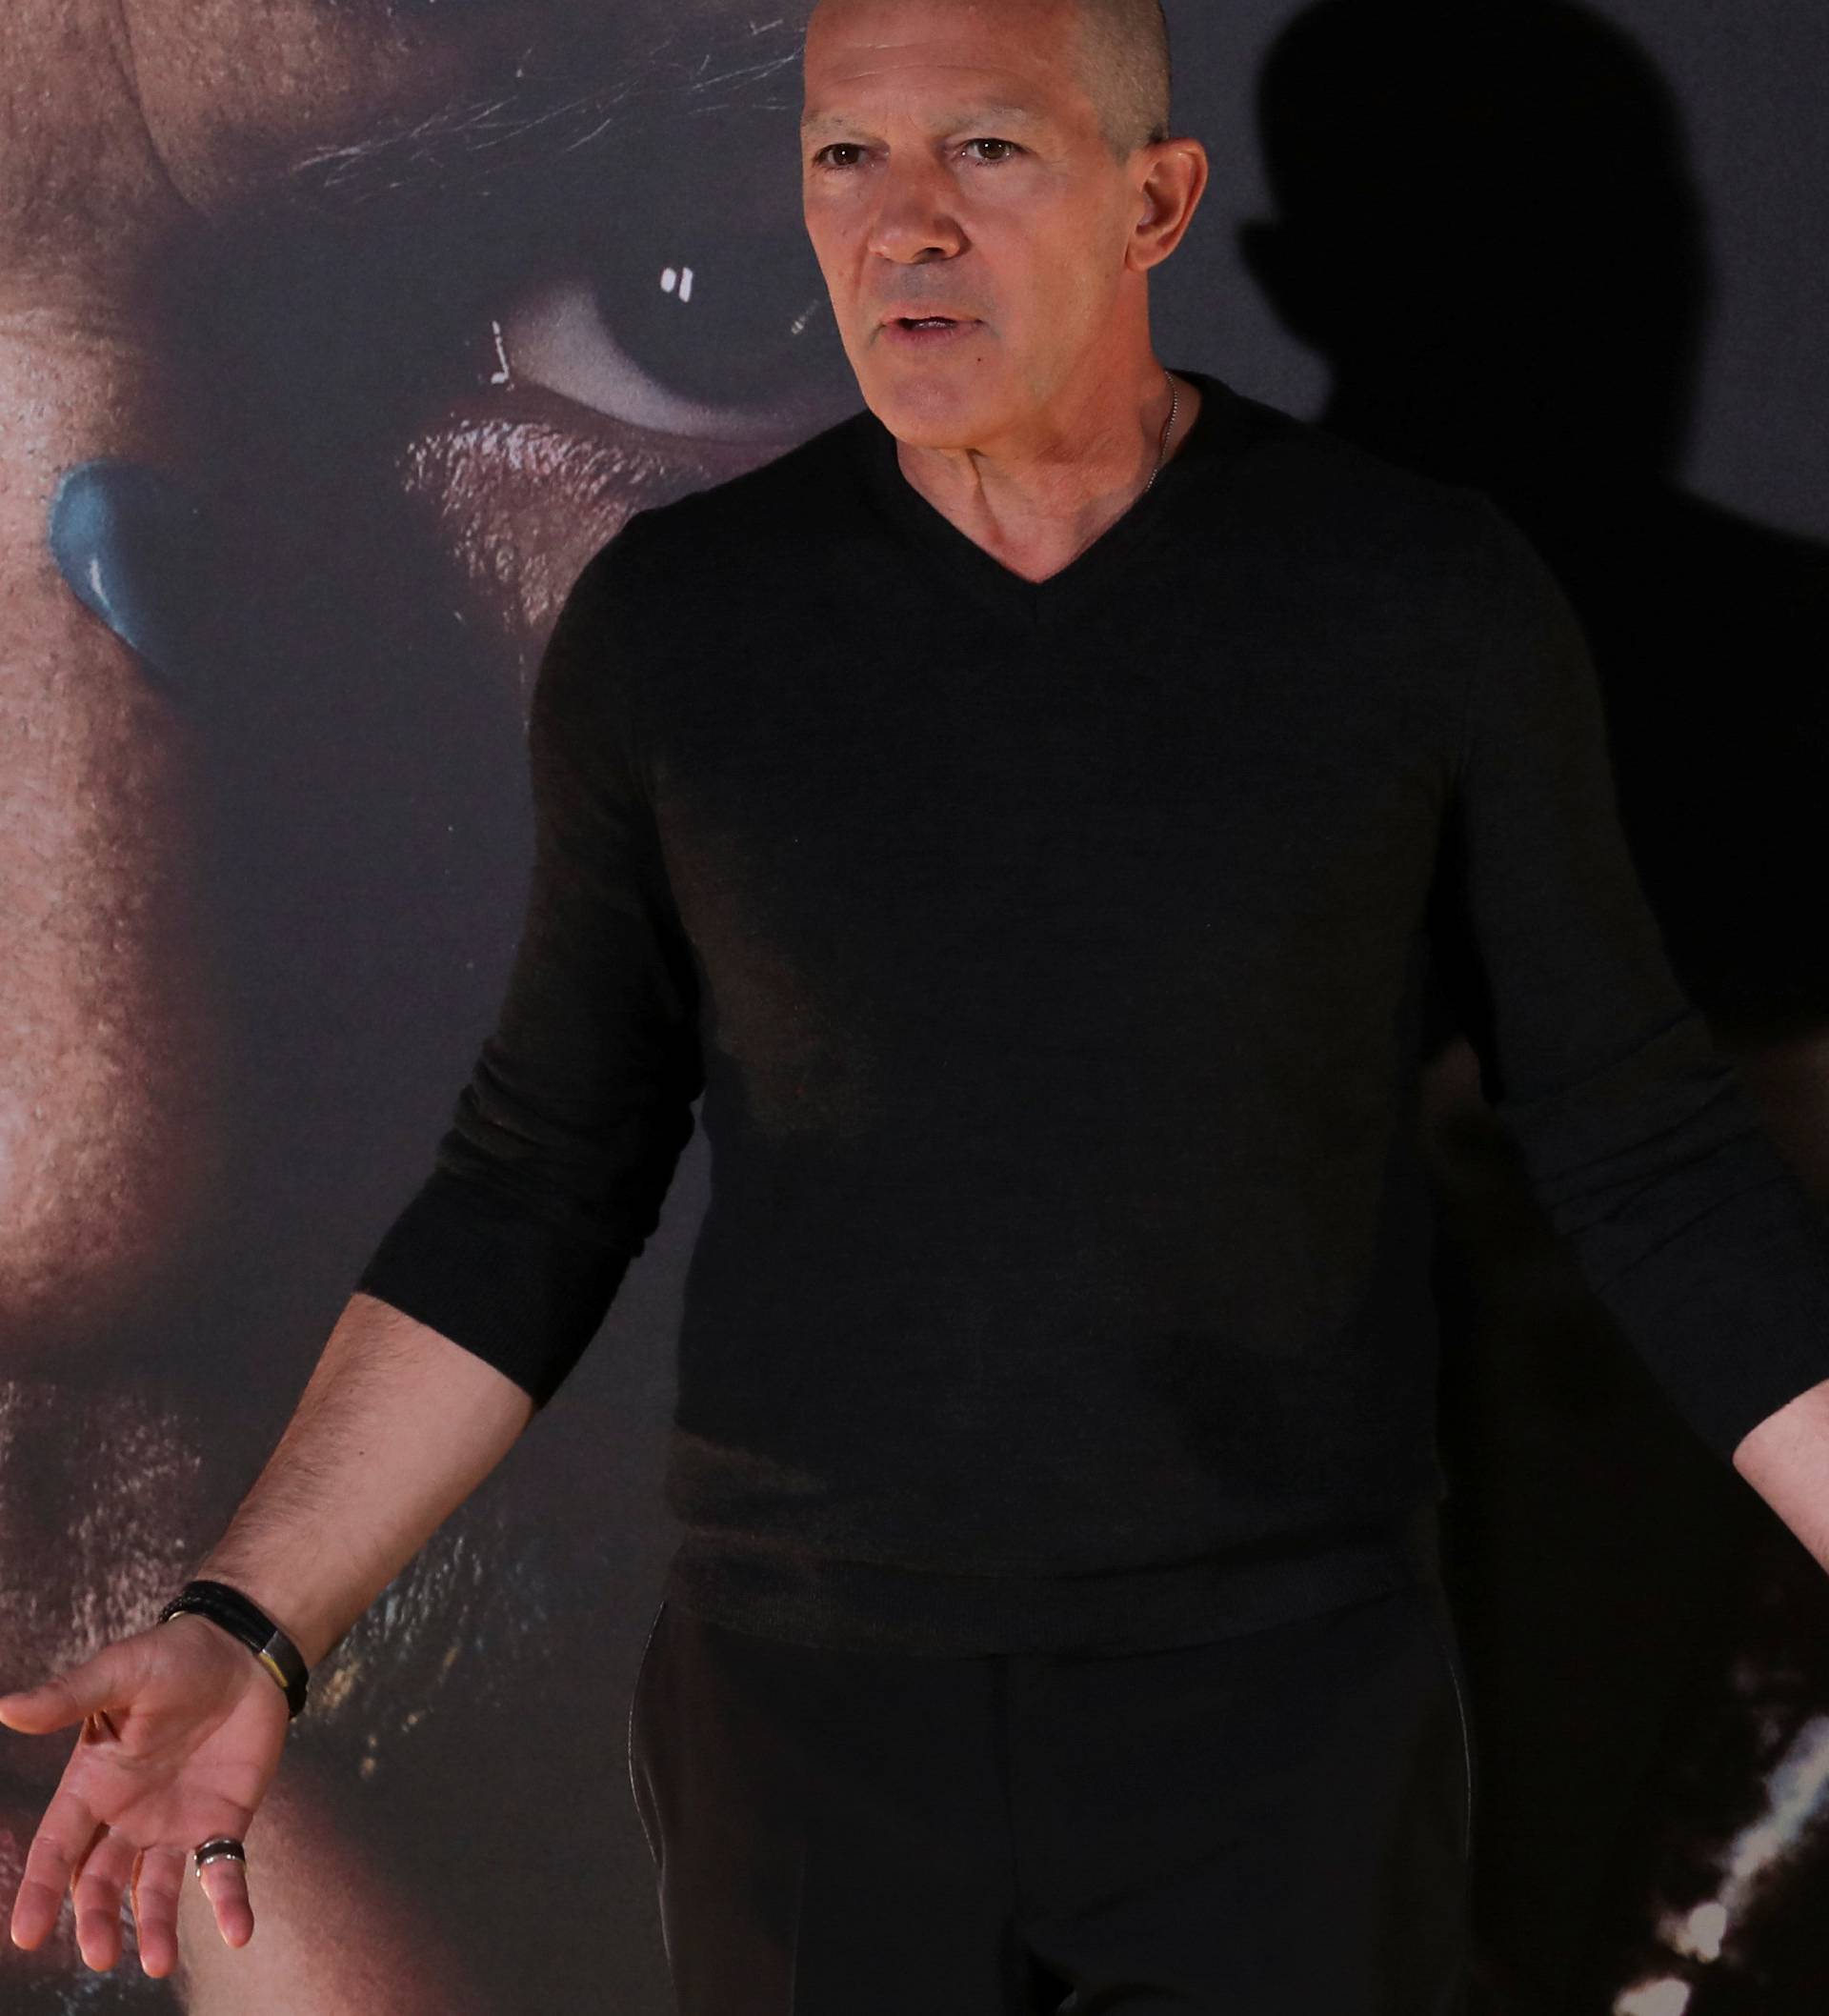 Spain's actor Banderas poses during a photocall to promote his latest television series "Genius: Picasso" in Madrid